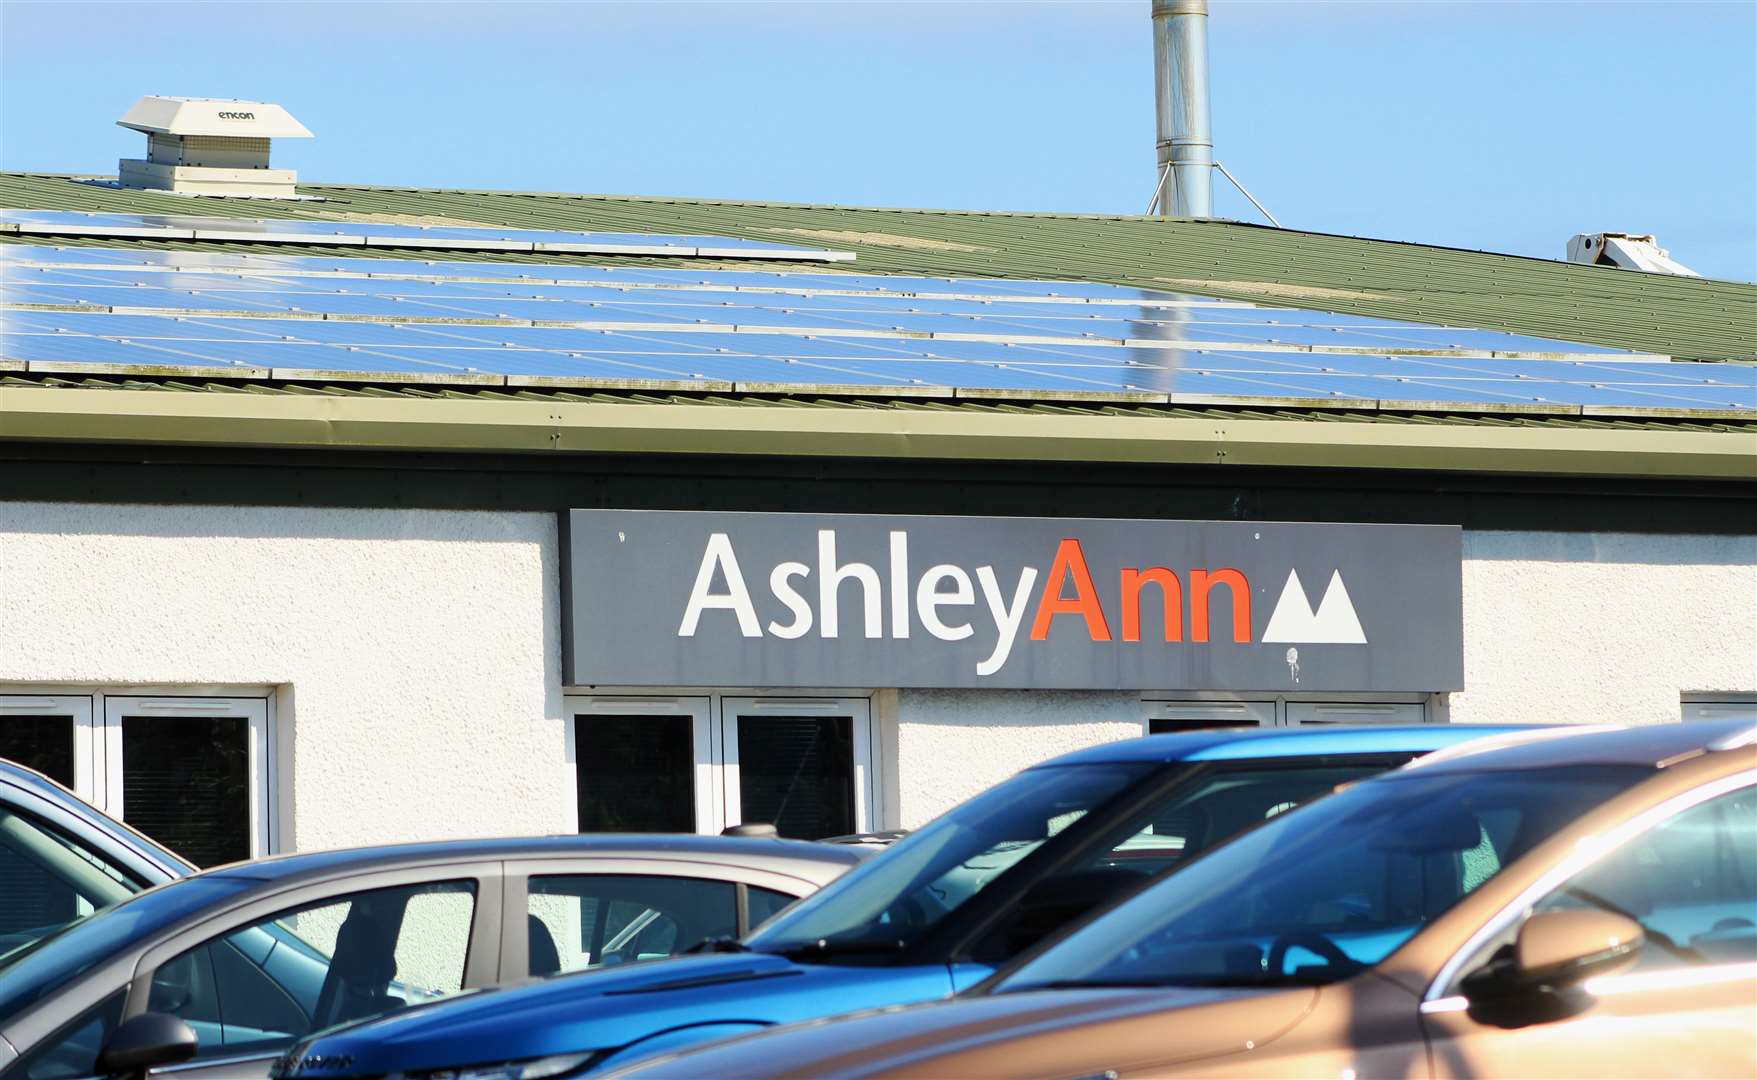 Ashley Ann's head office and manufacturing facility is located in Wick.